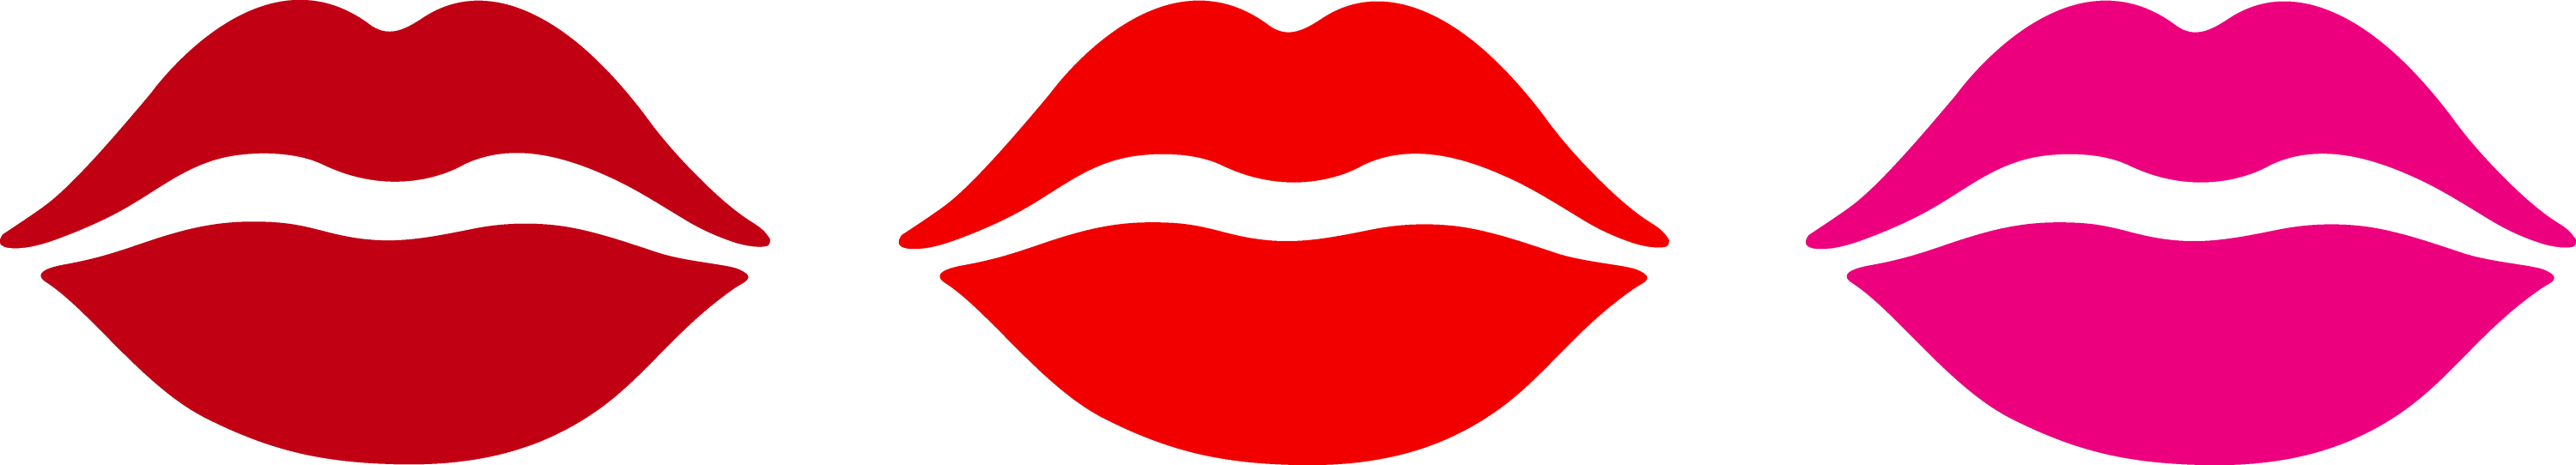 free clipart images lips - photo #47